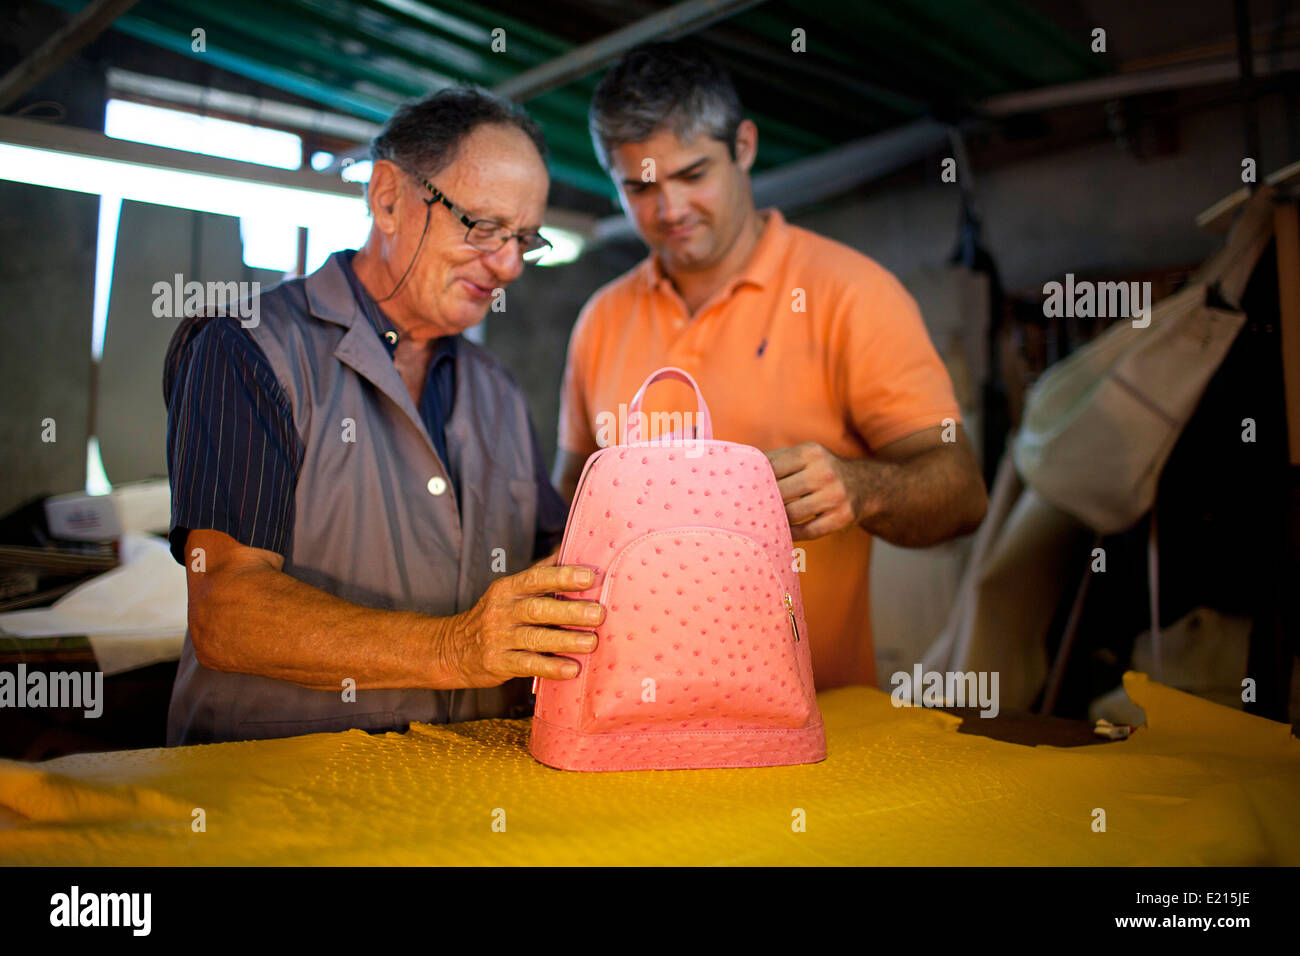 Elderly Italian father and middle aged son inspect a handmade leather bag in their workshop. Stock Photo